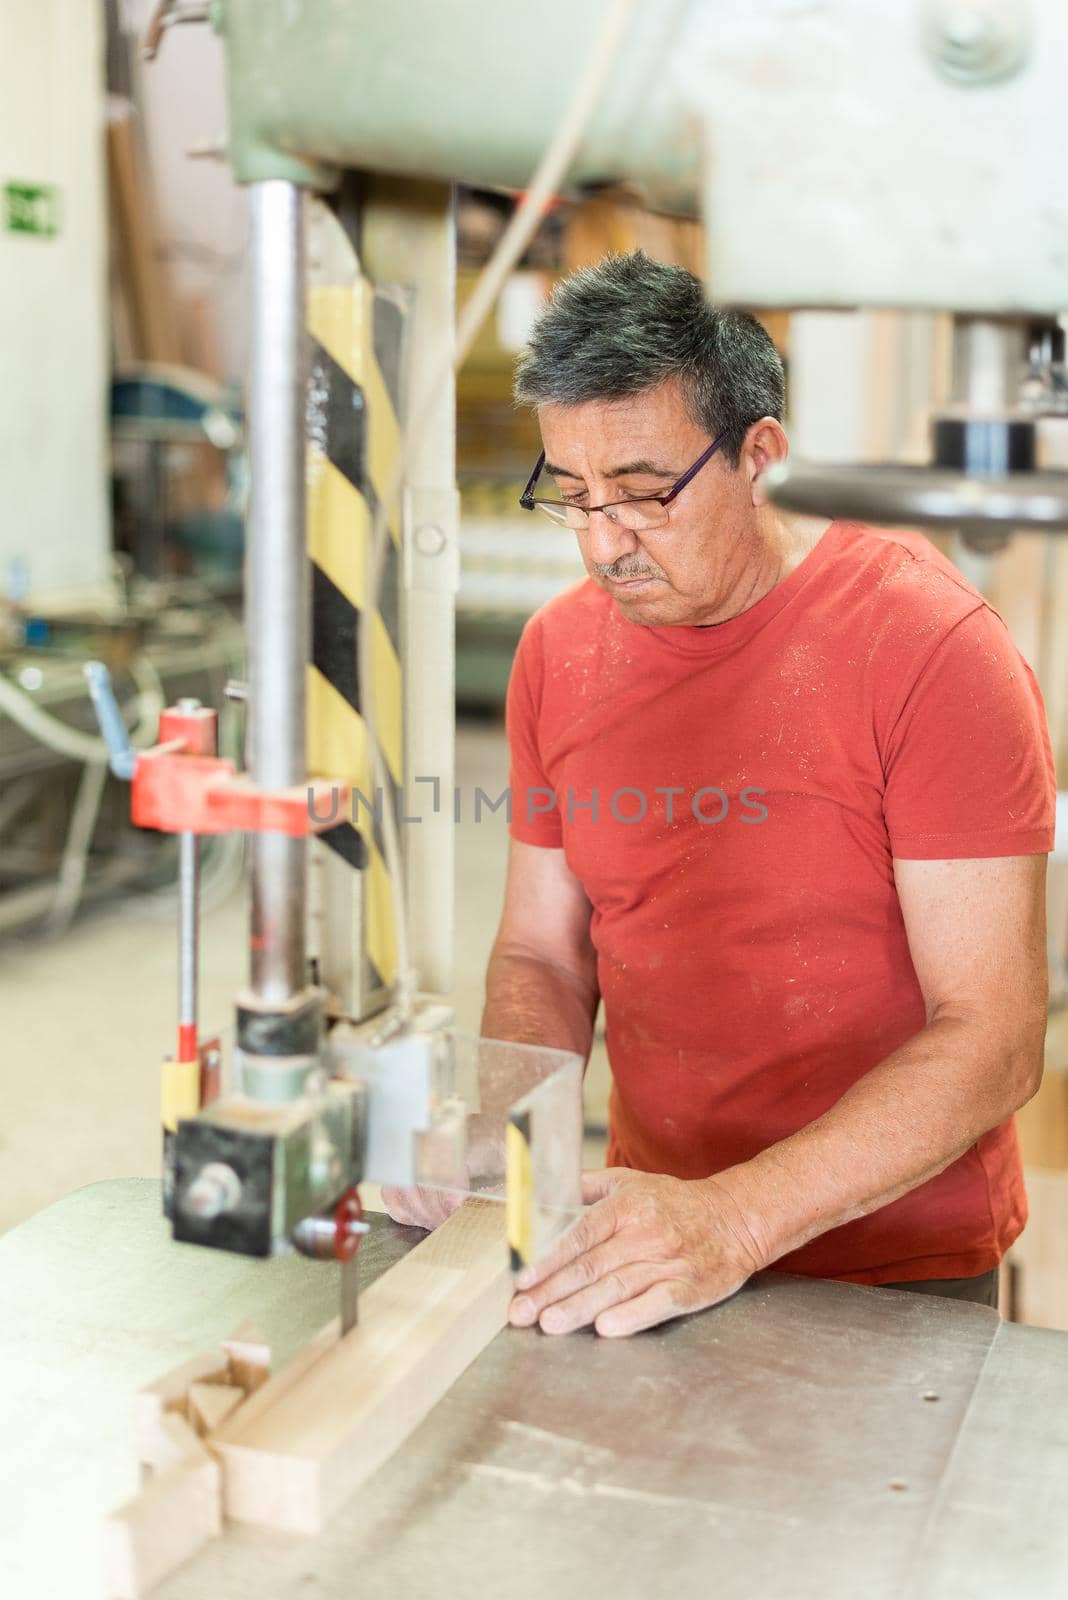 Man focused cutting a wooden board with a band saw, vertical foreground, blurred background